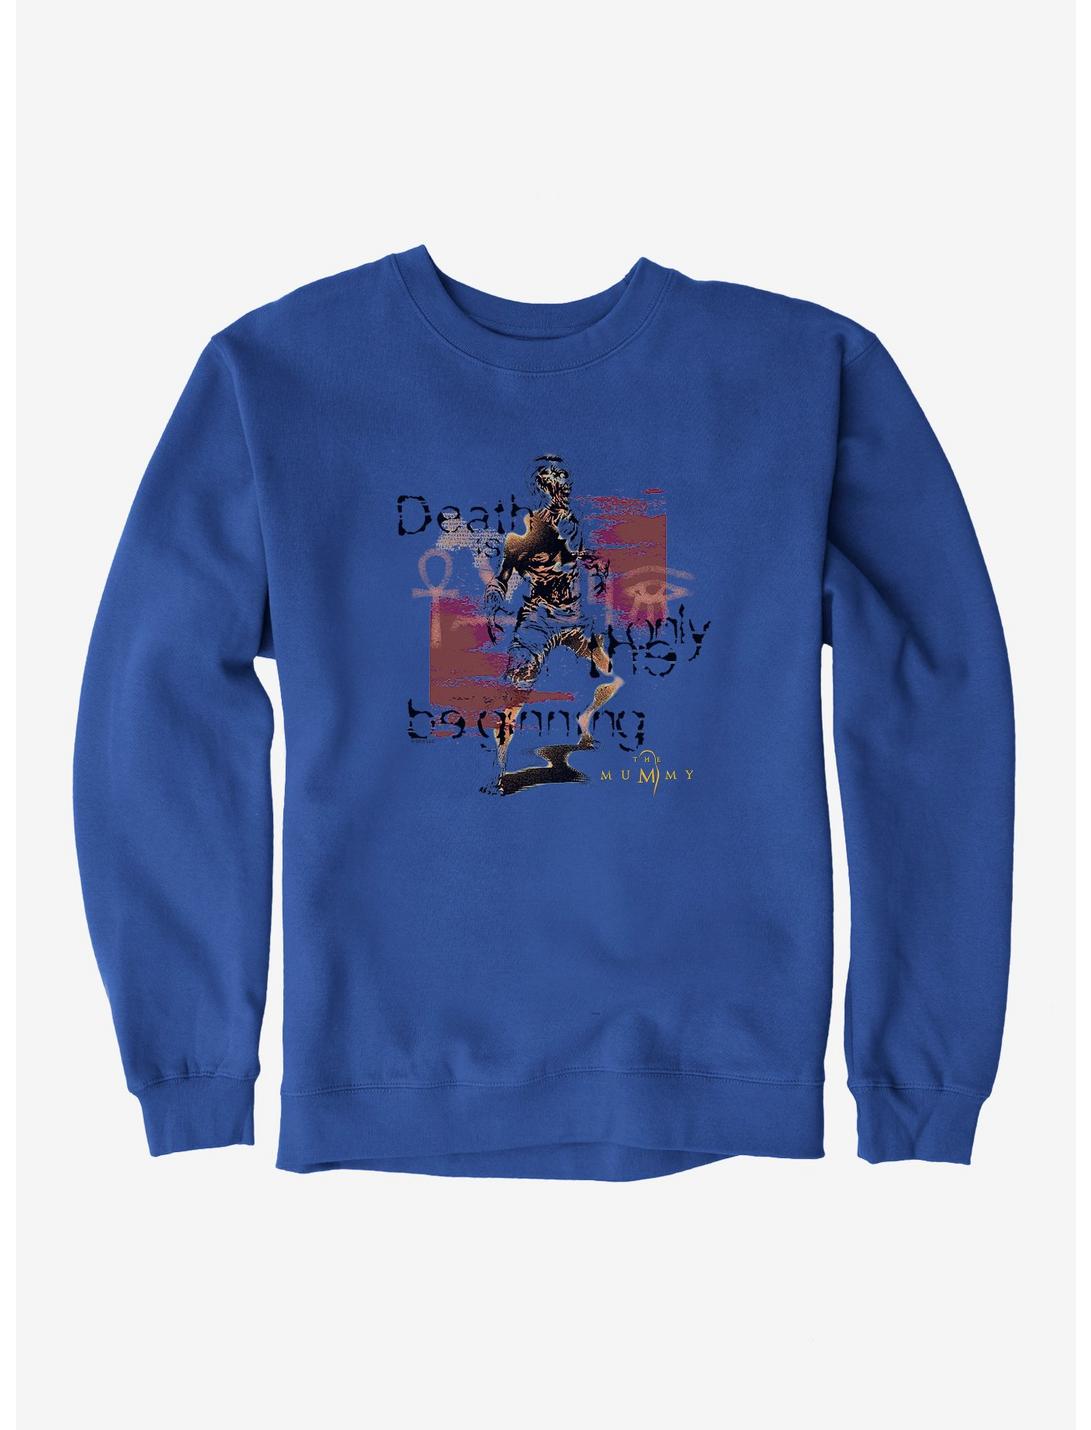 The Mummy Death Is Only The Beginning Sweatshirt, ROYAL BLUE, hi-res